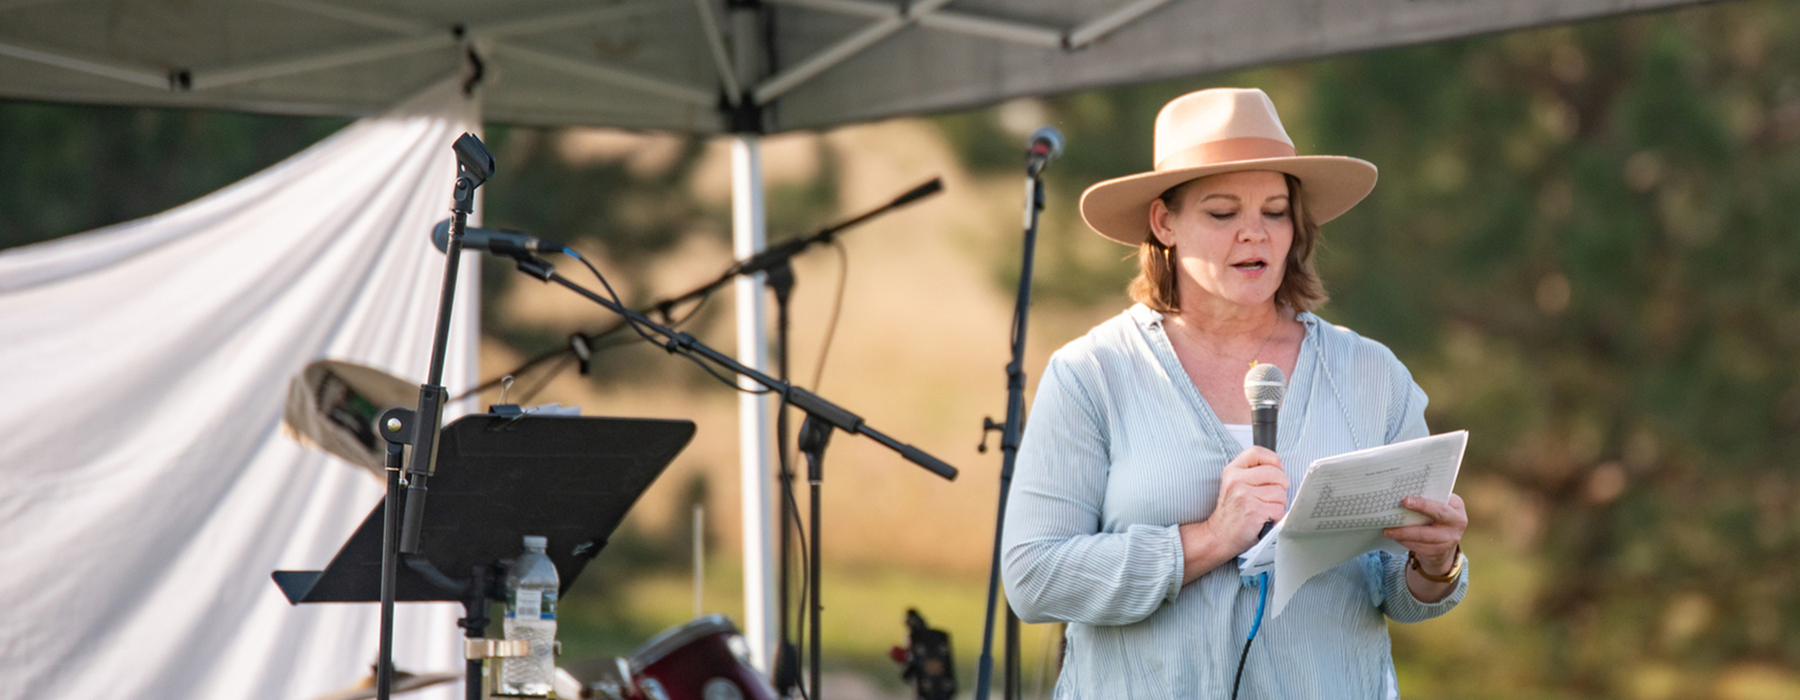 Woman in sunhat and light blue long sleeved shirt speaking into a microphone held in one hand and a couple papers in the other hand